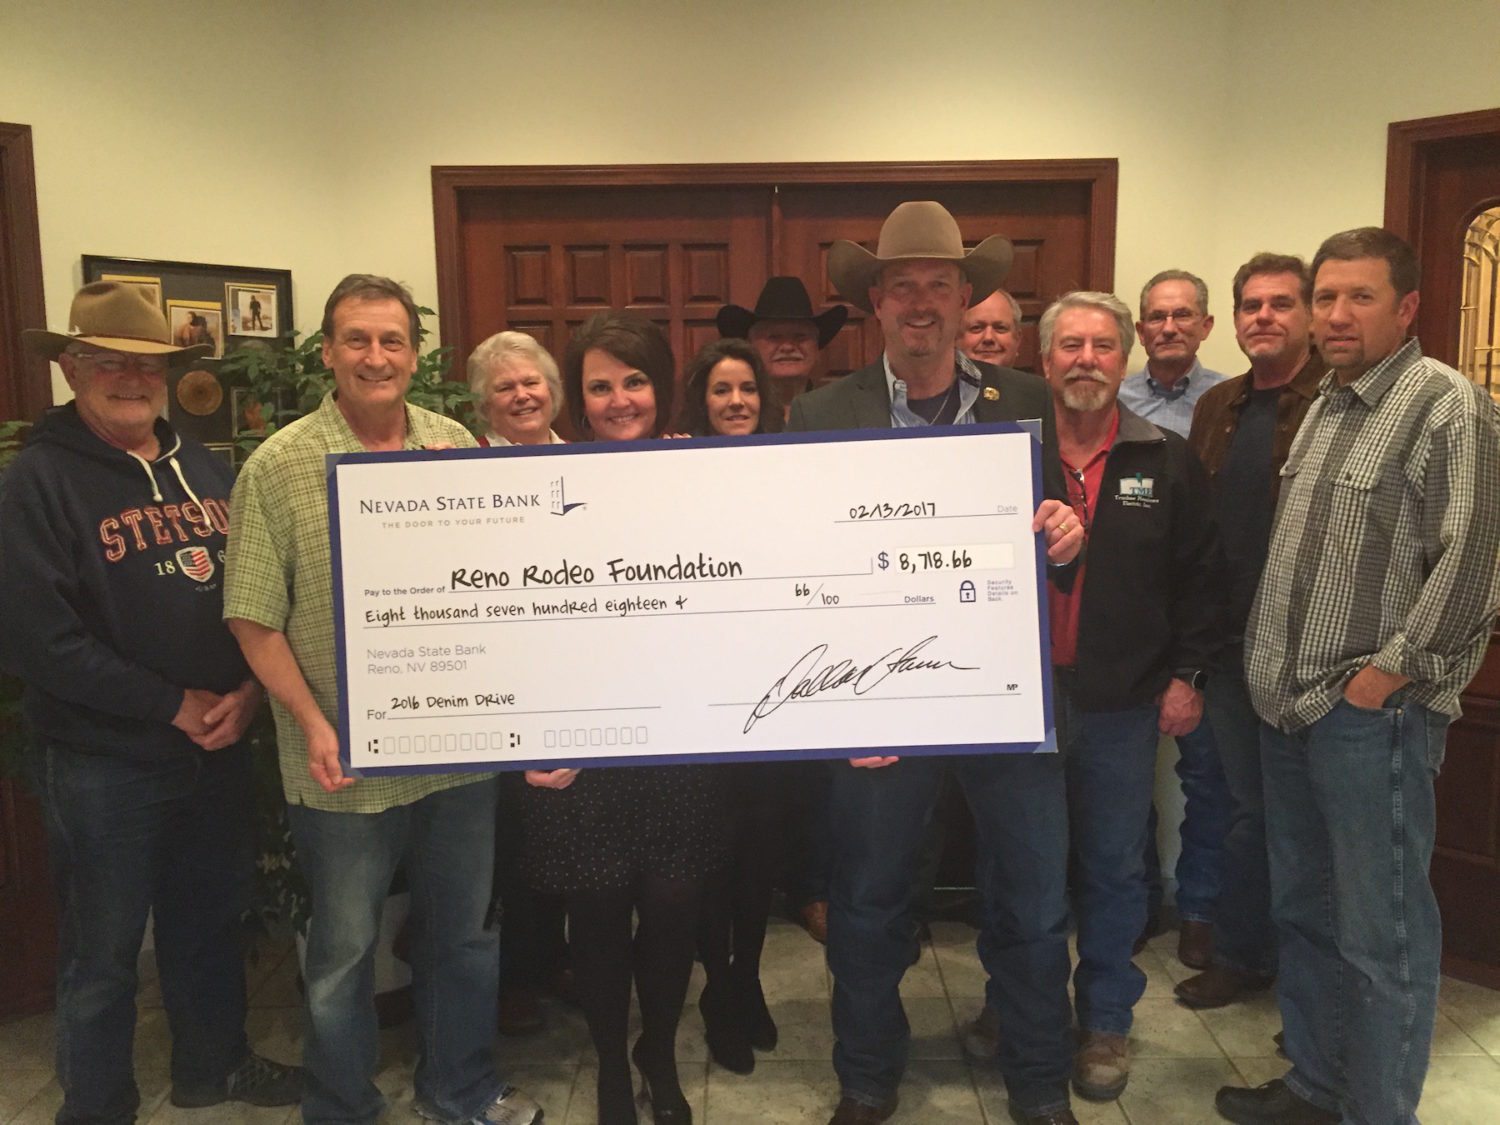 Nevada State Bank's Debby Herman presents check to Reno Rodeo Foundation